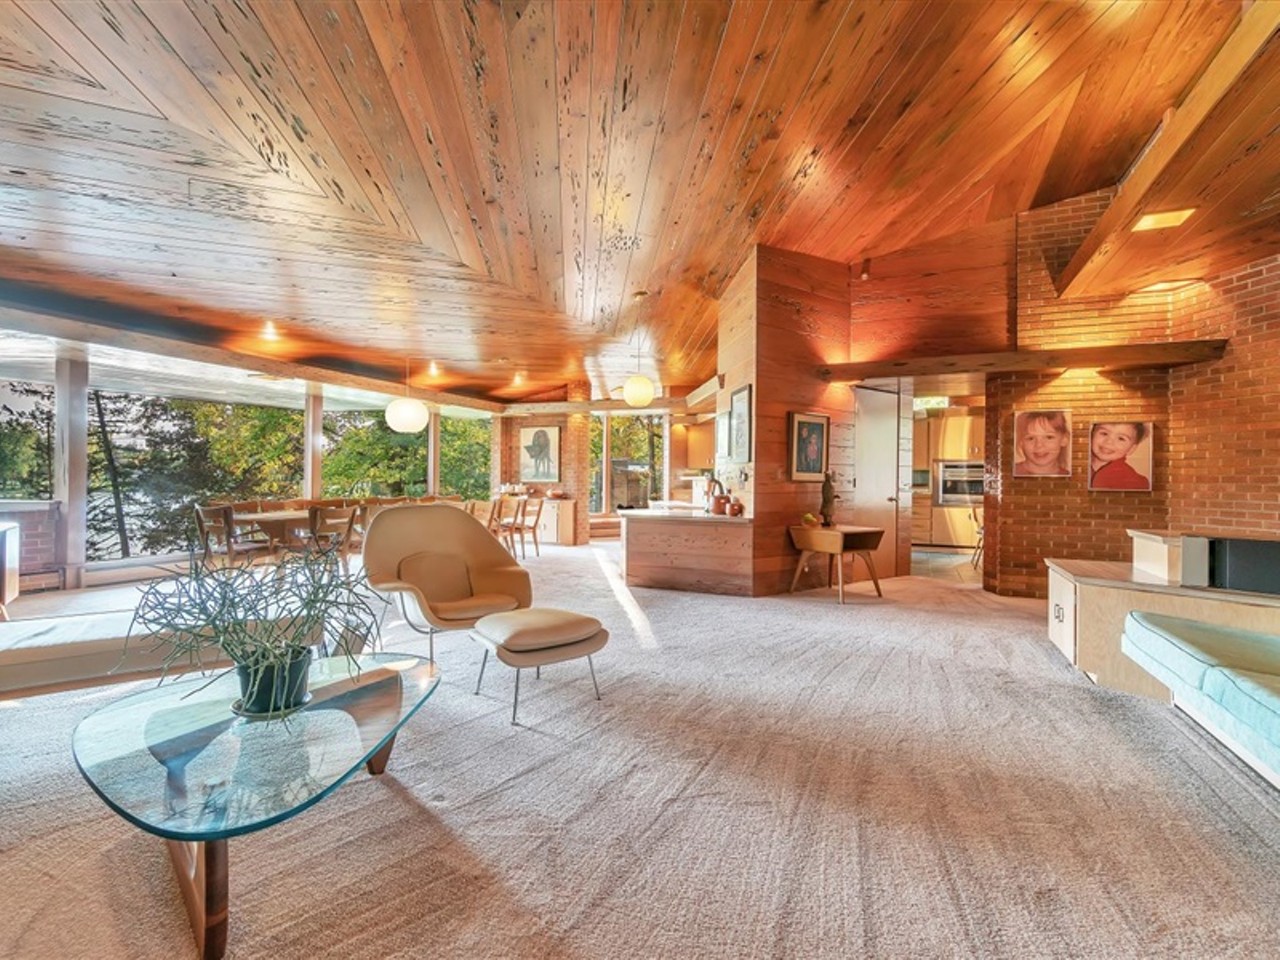 This $499k mid-century home in Grand Blanc was made without right angles &#151;&nbsp;let's take a tour